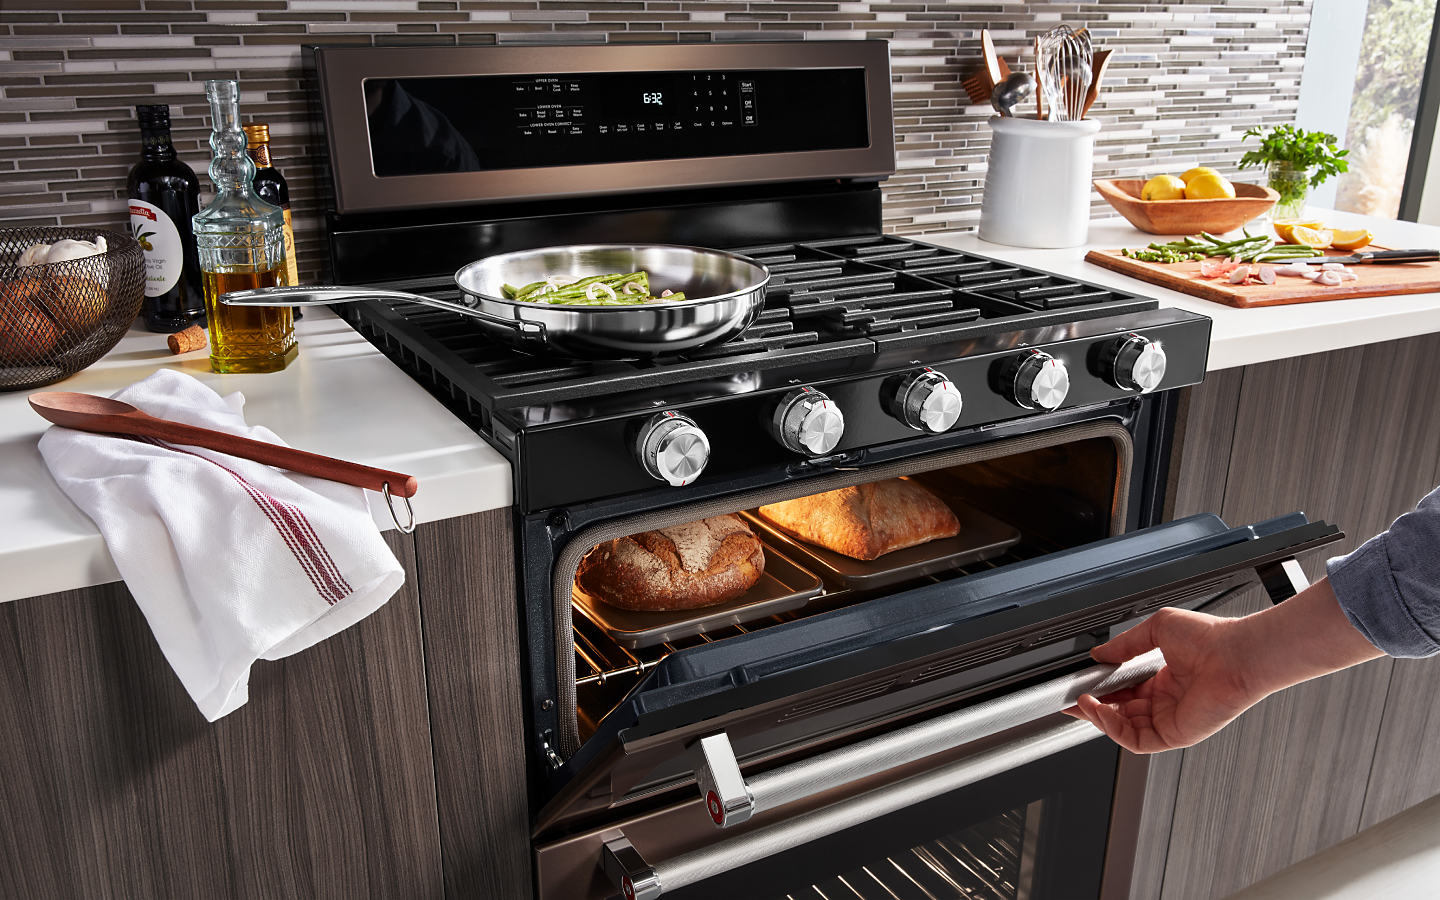 Why Your Gas Oven Is Not Heating Up: 5 Potential Causes